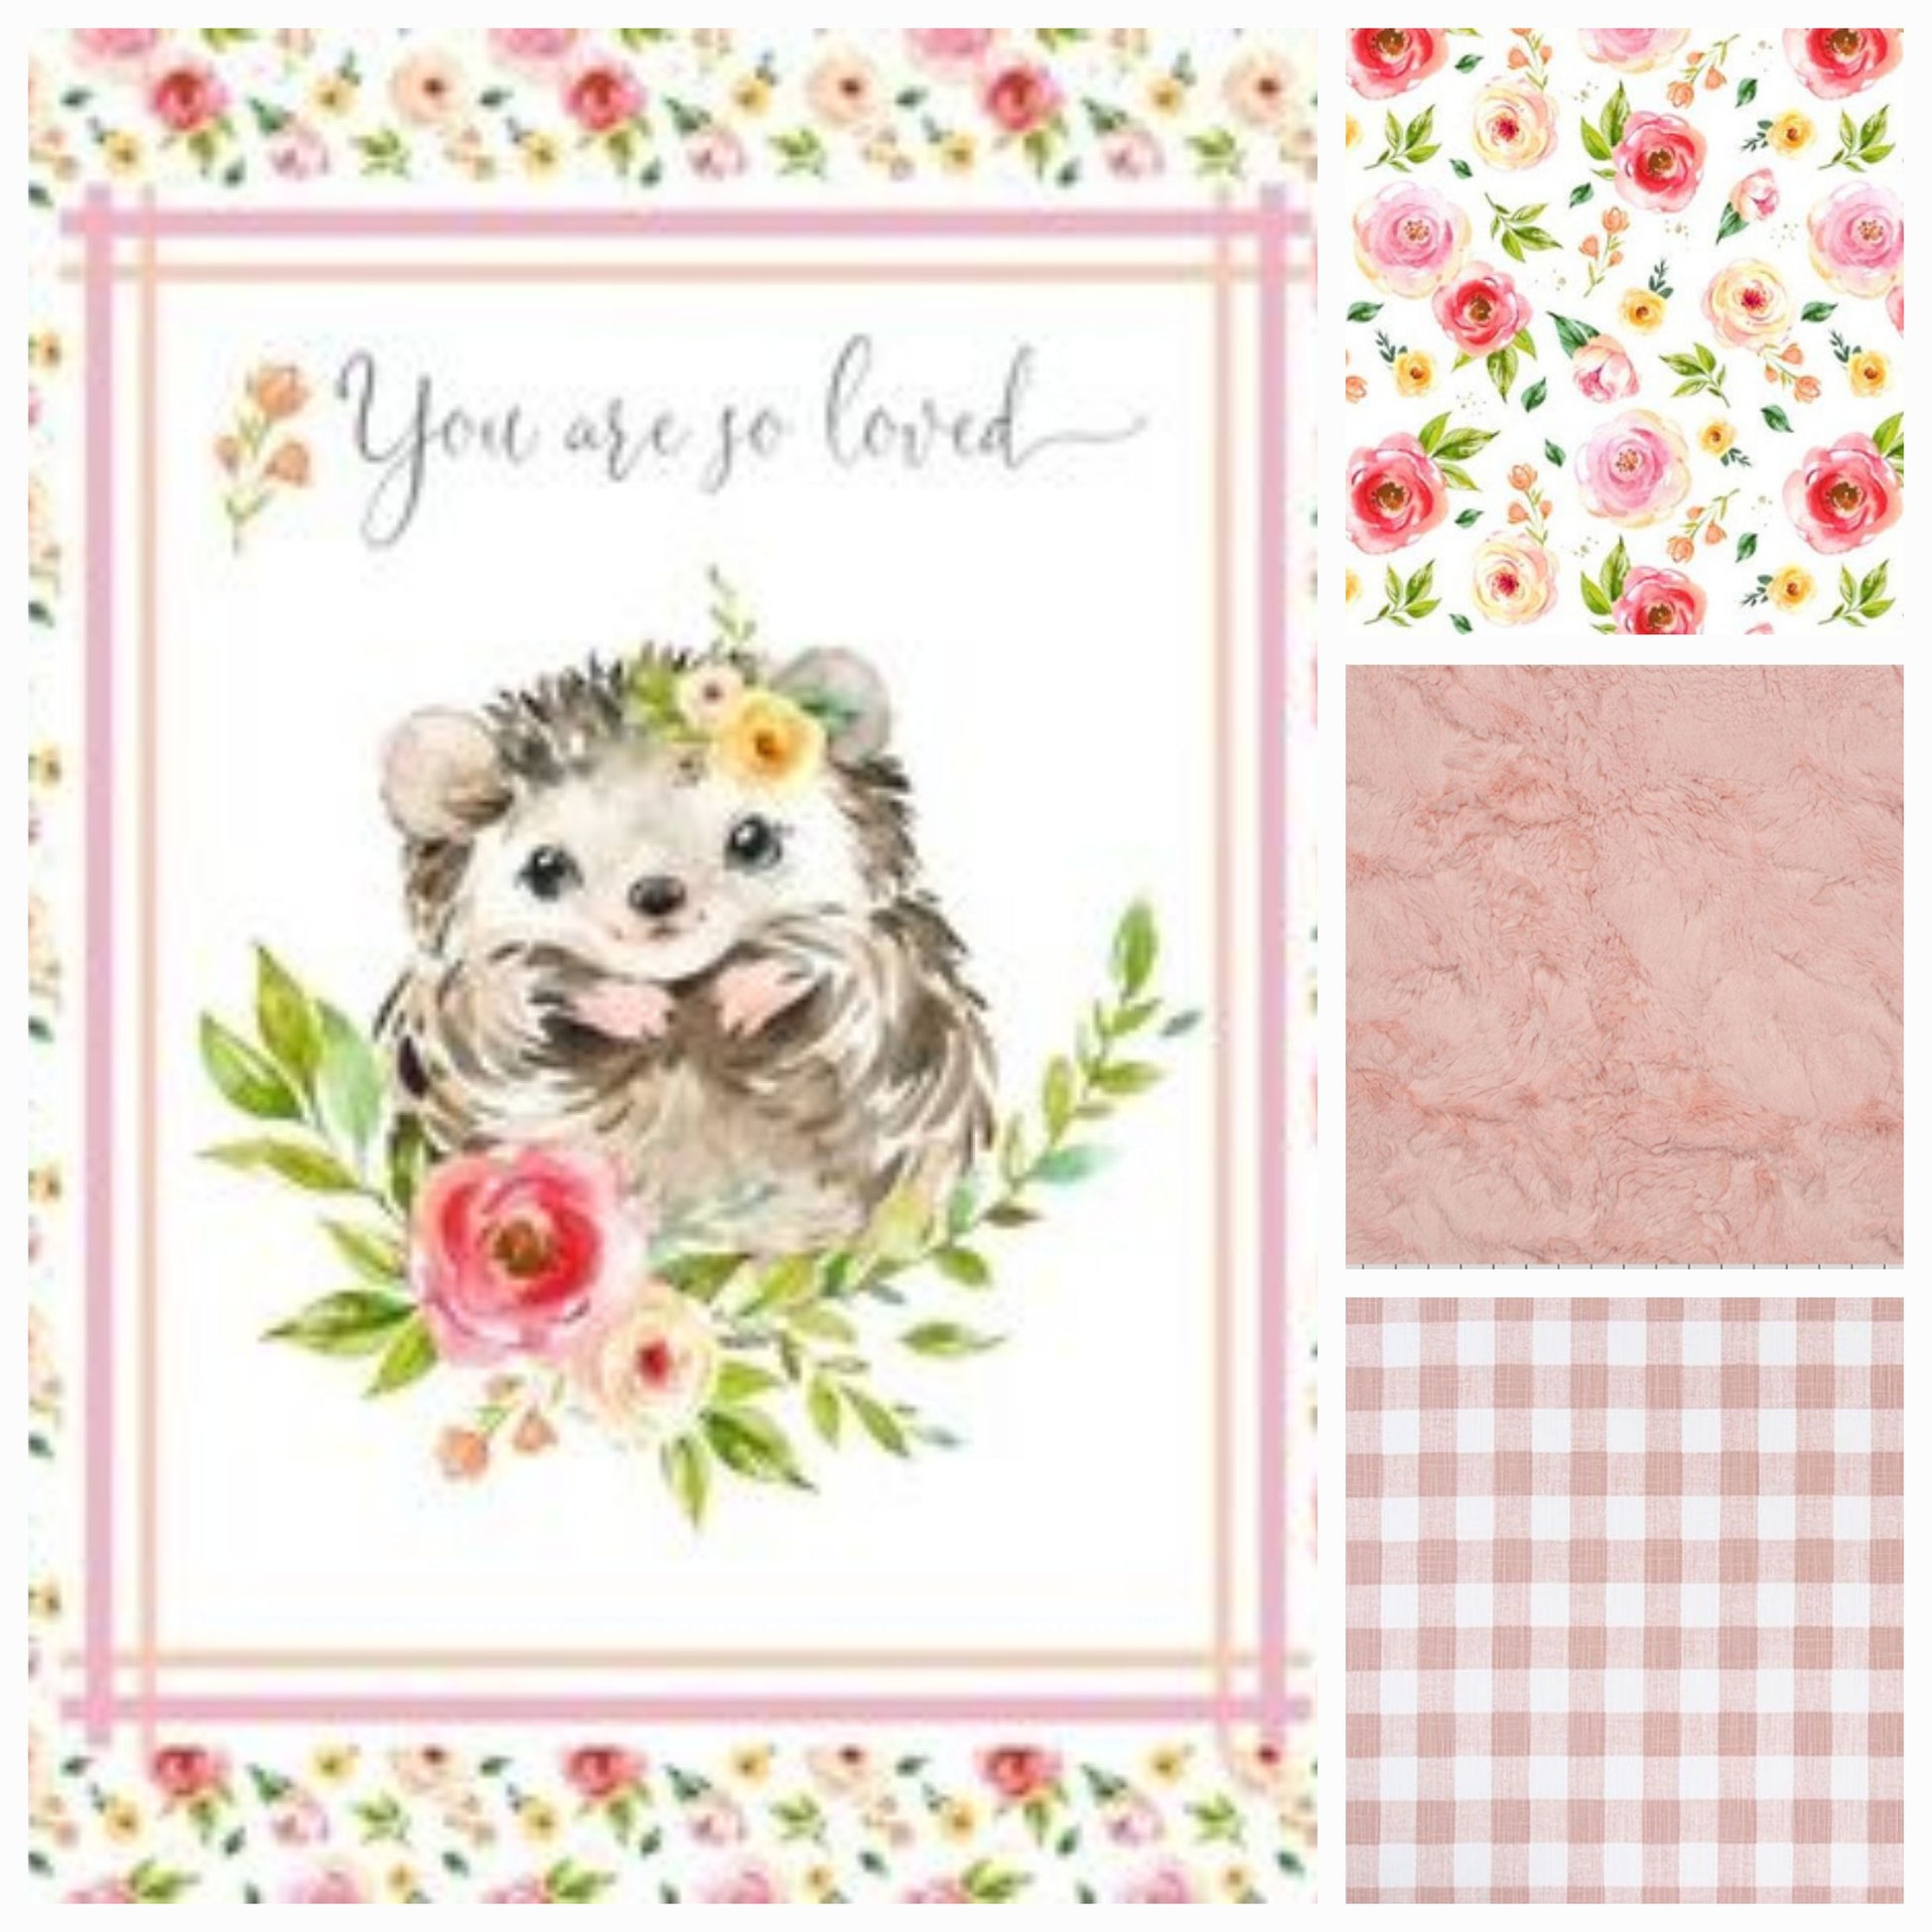 New Release Girl Crib Bedding - You are Loved Hedgehog and Floral Woodland Baby Bedding Collection - DBC Baby Bedding Co 